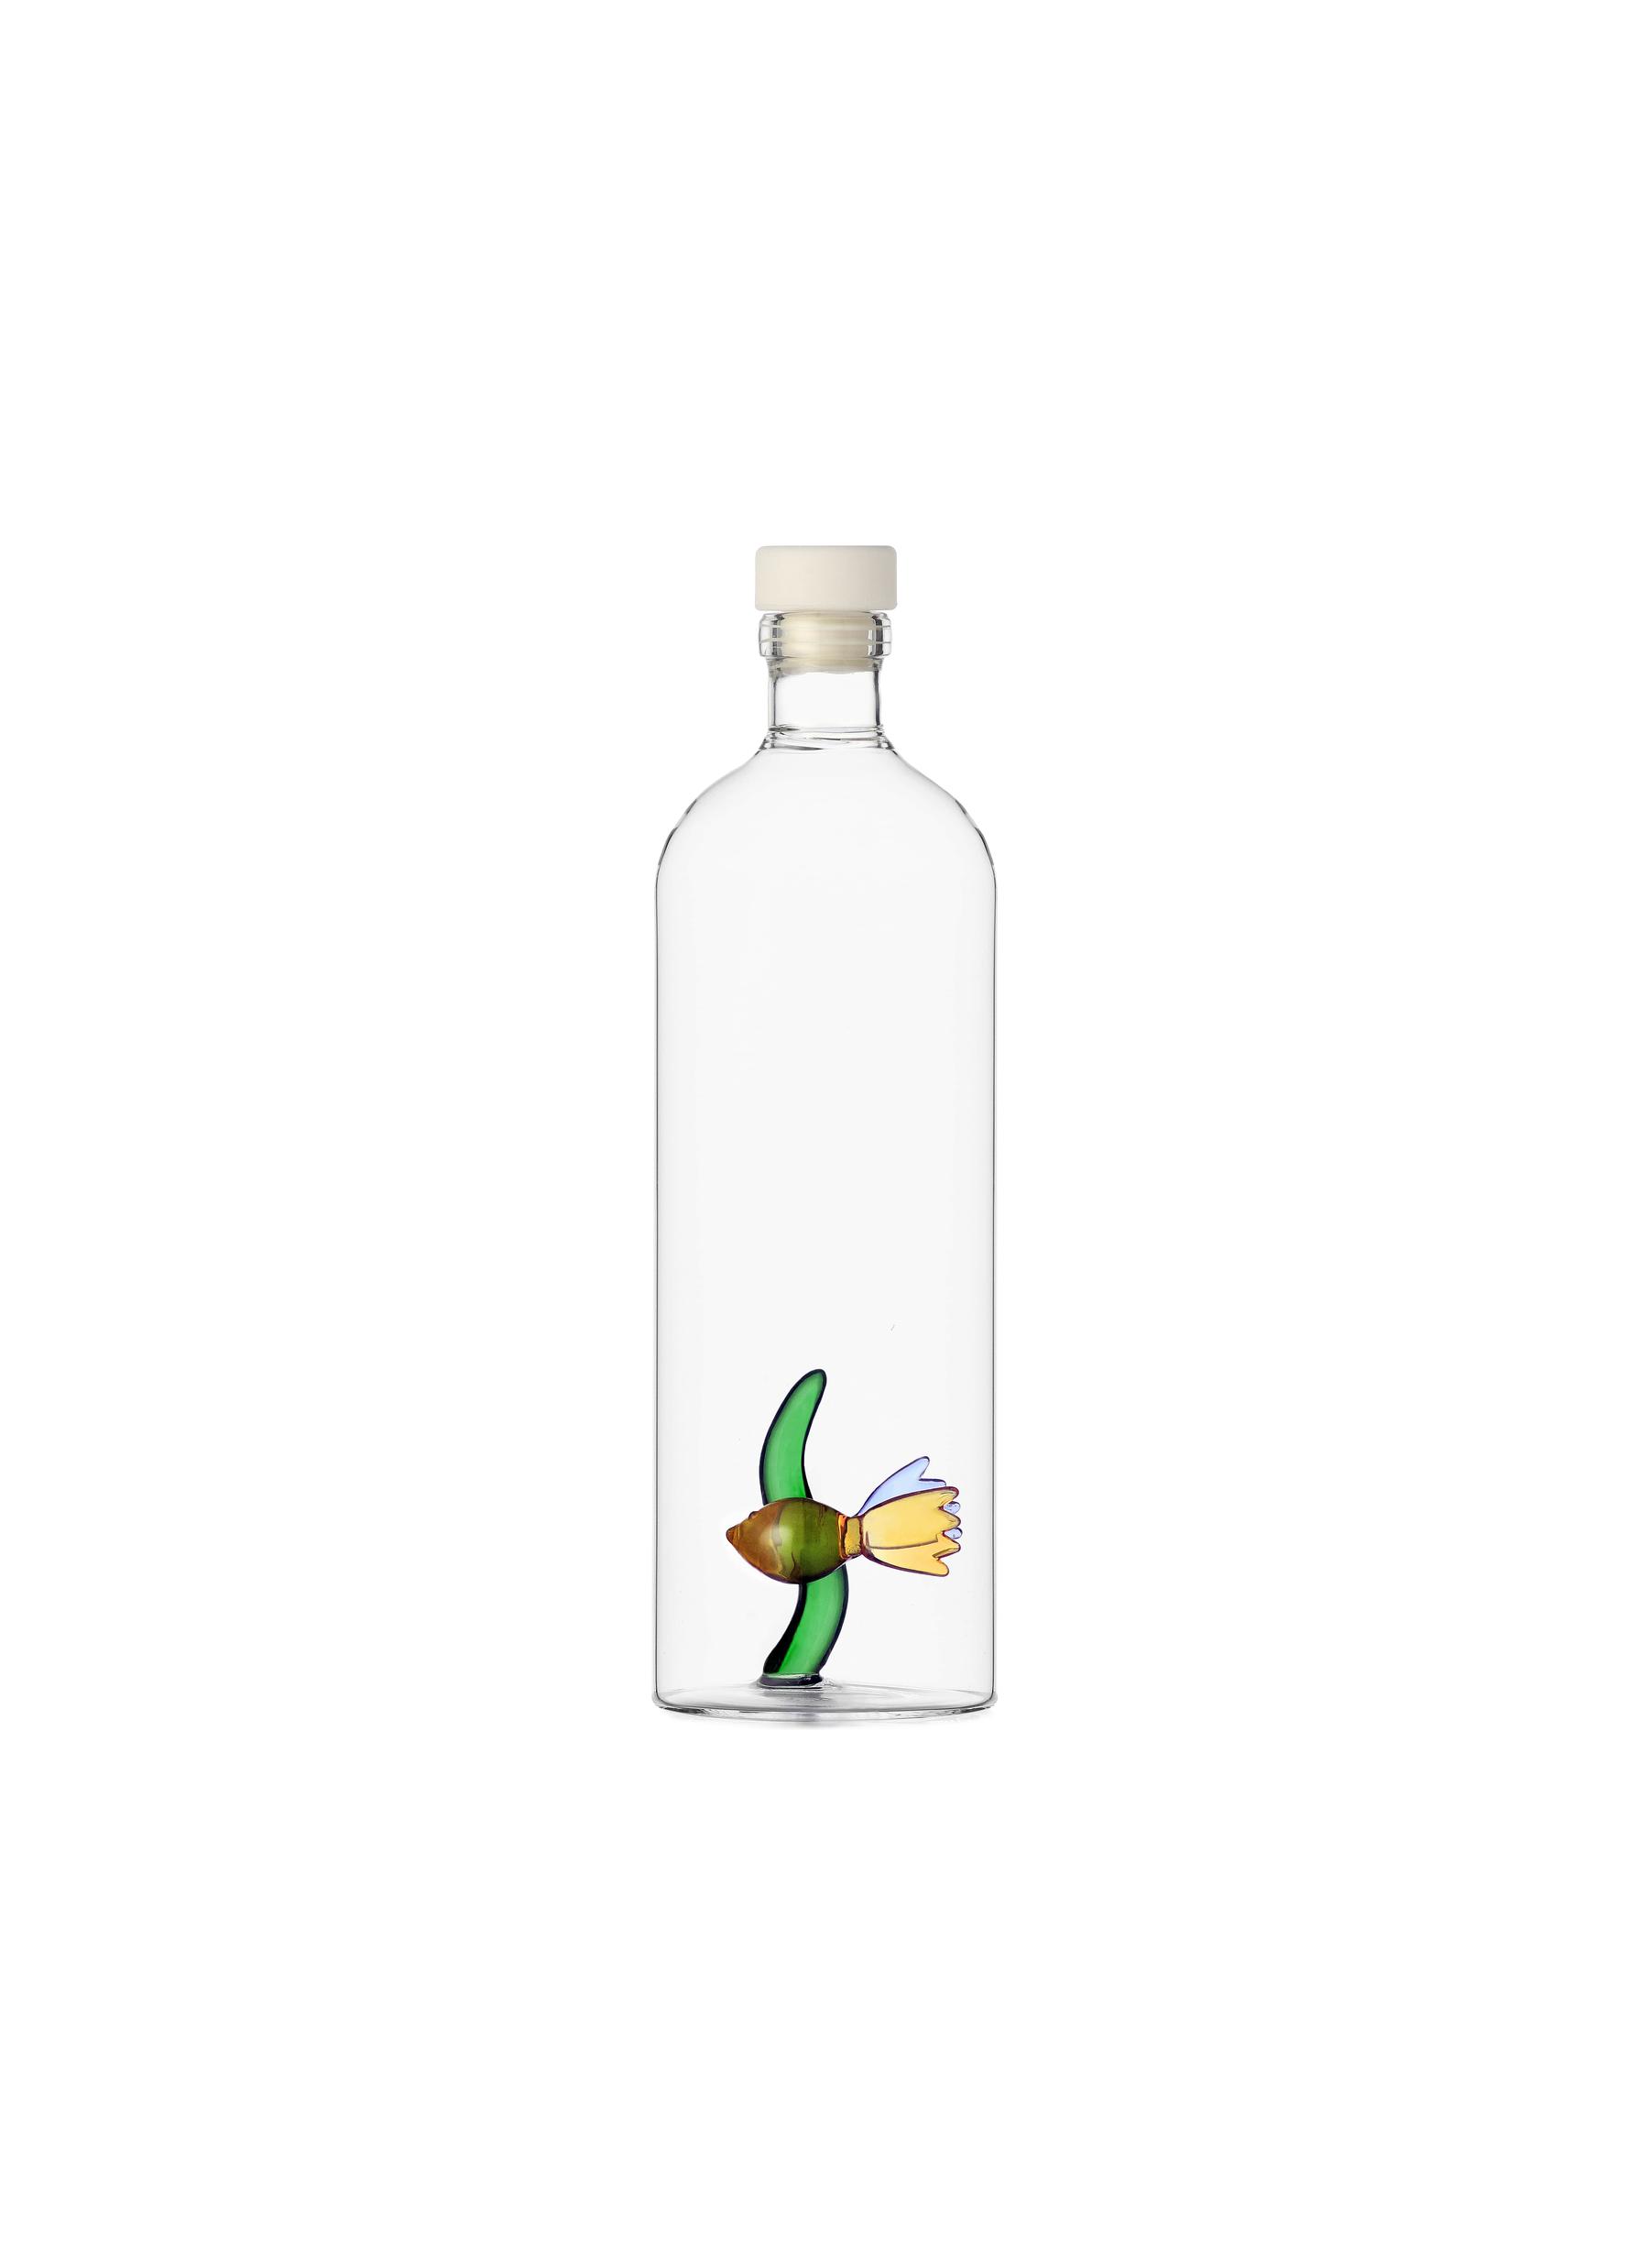 ANIMAL FARM FISH AND SEAGRASS BOTTLE